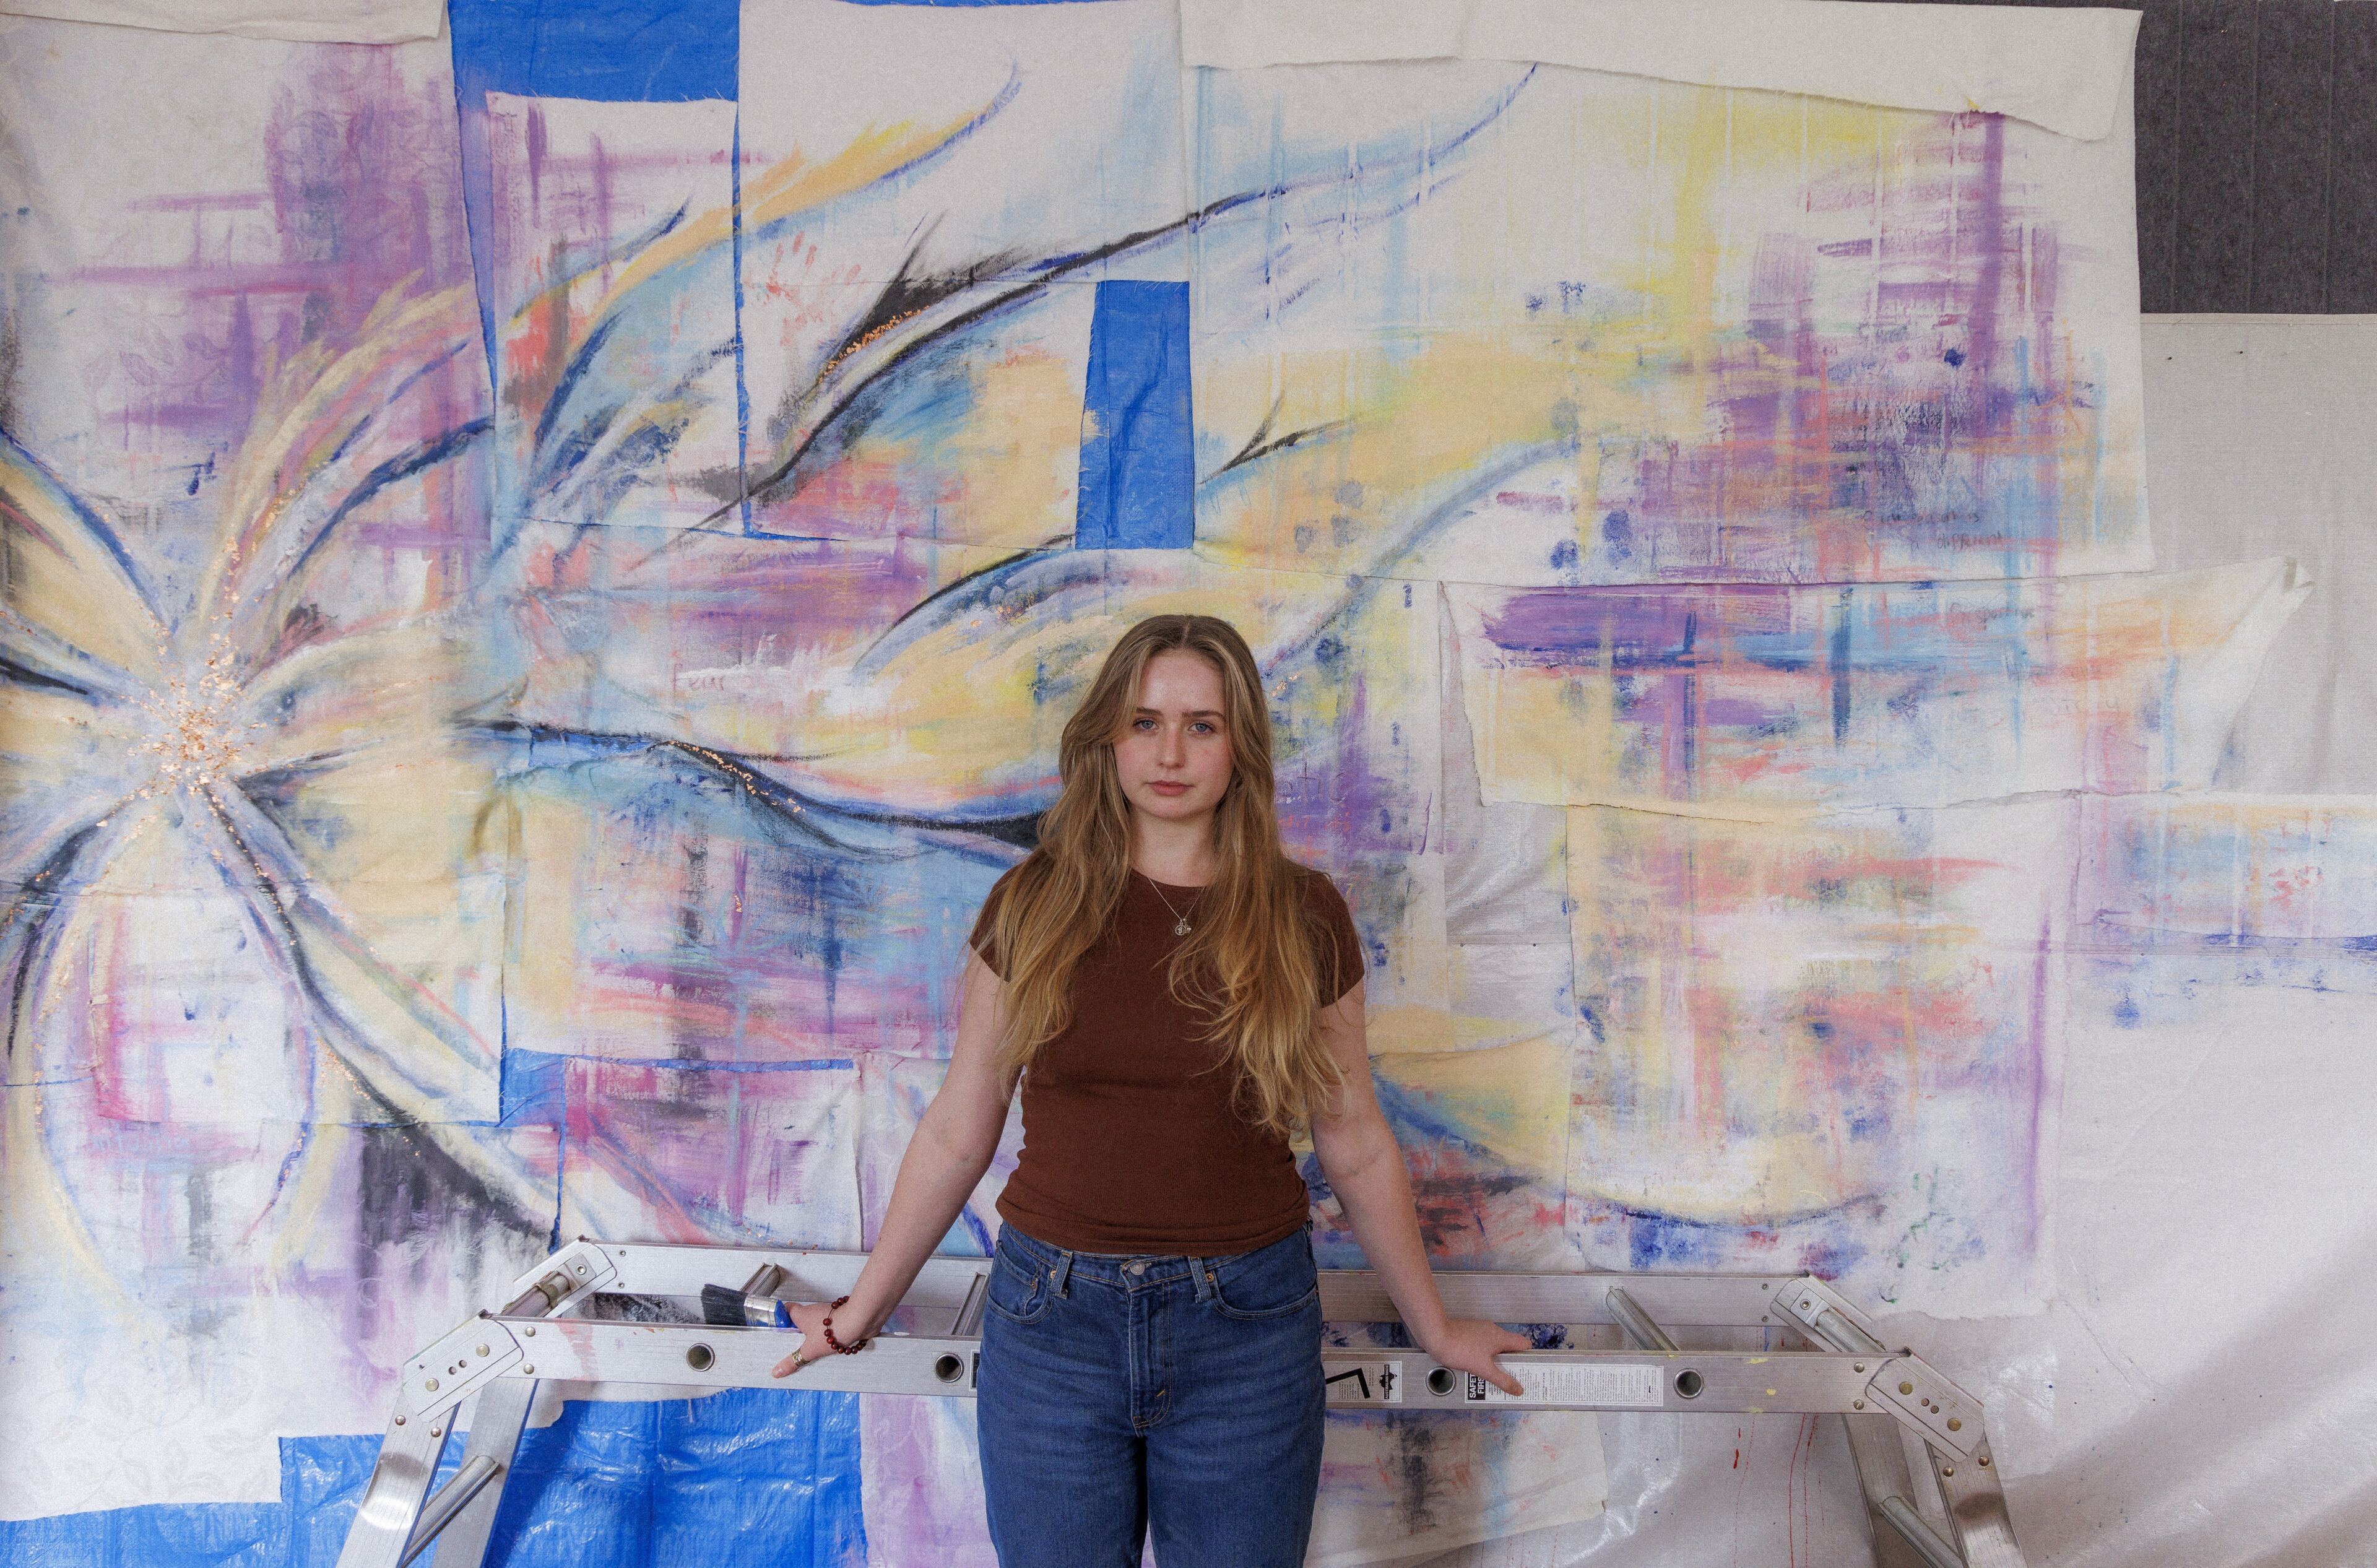 An artist stands resolute before her expressive, abstract painting on a large canvas.